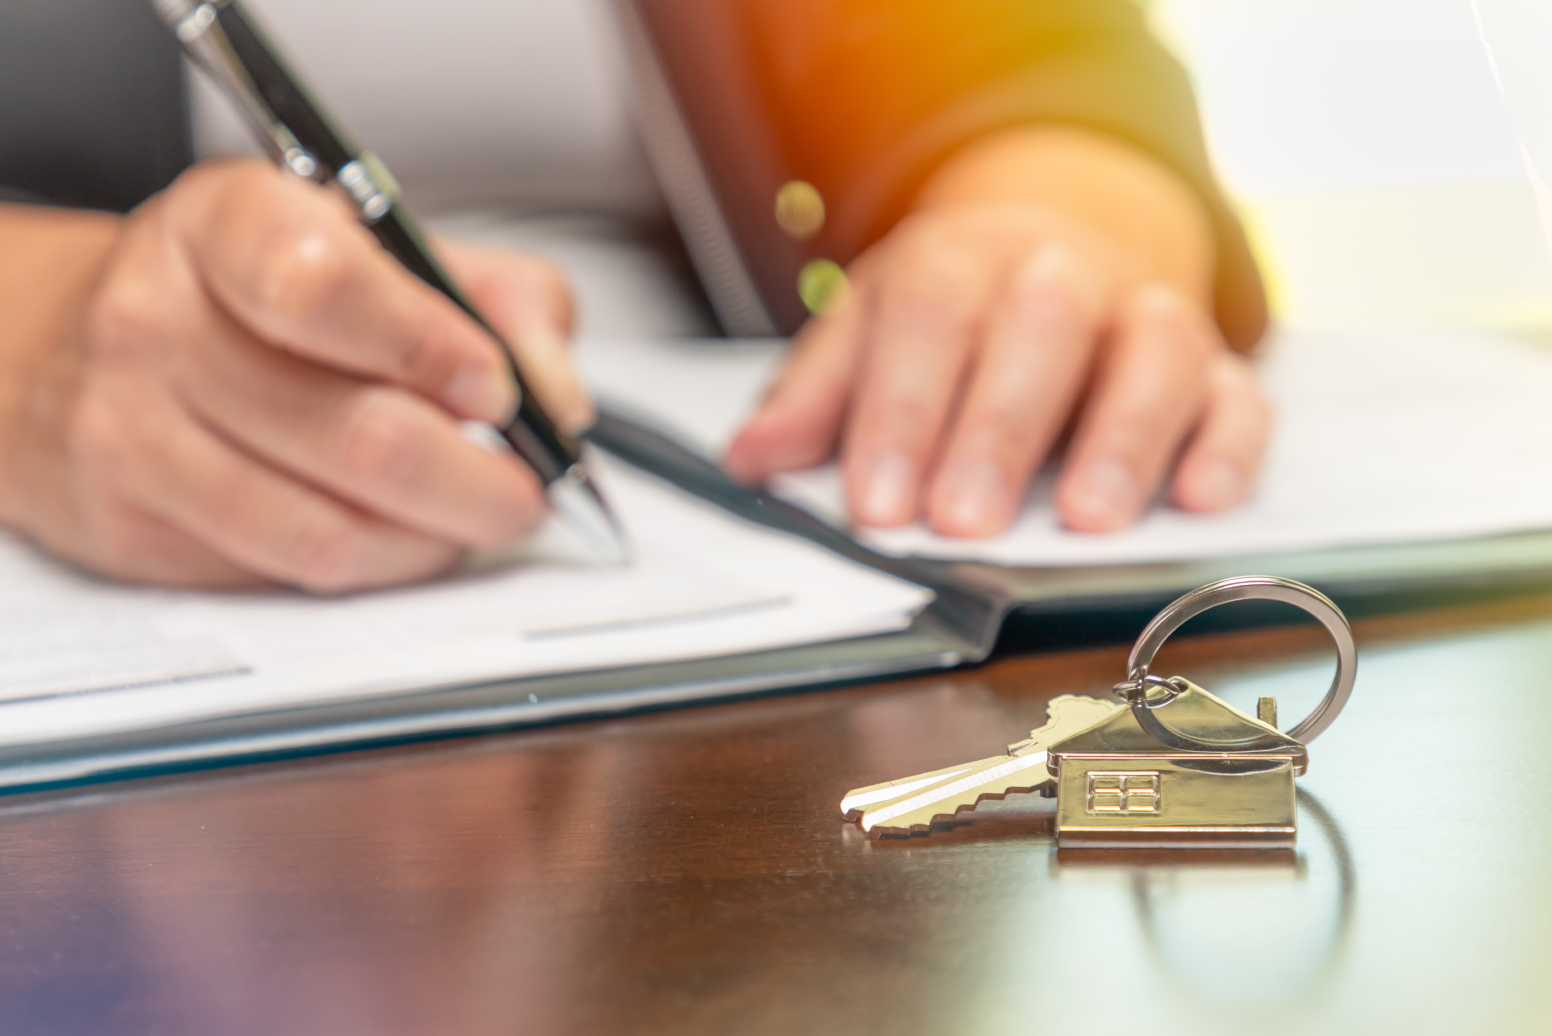 A person signs documents in a binder. A set of keys rests on the desk in front of the binder. A quitclaim deed can be used to transfer title of a property to another person or trust.